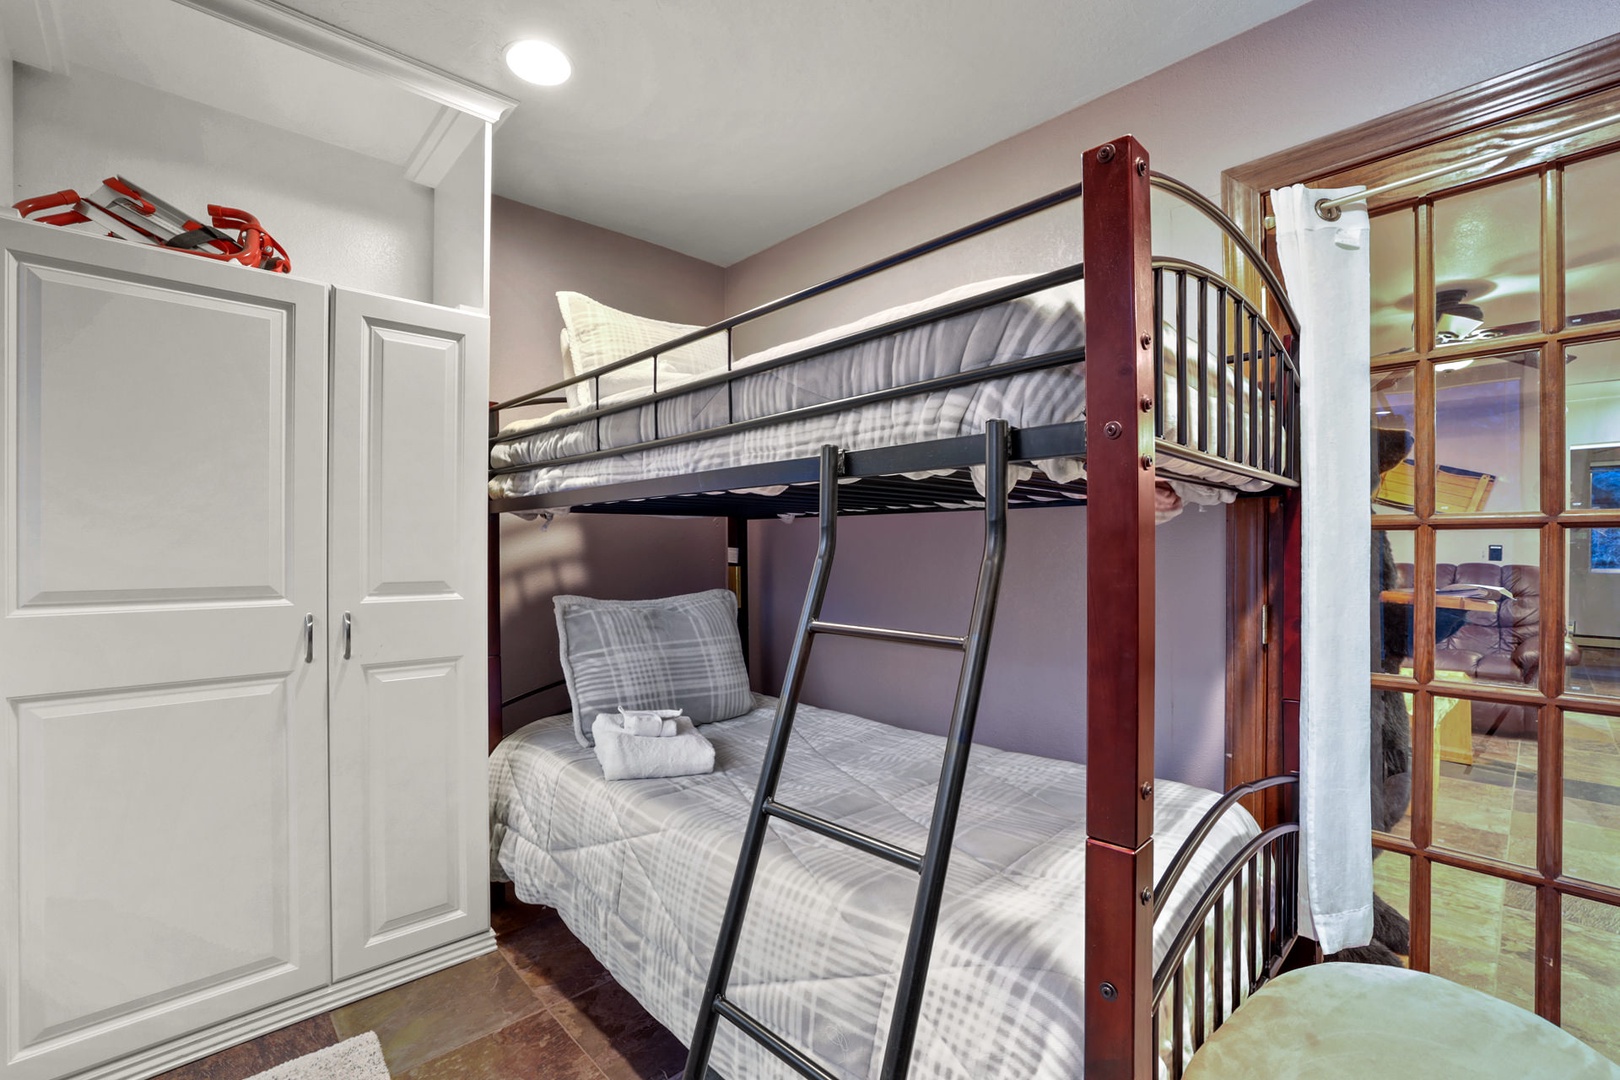 Bedroom 3 with Twin/Twin bunk bed - small room!